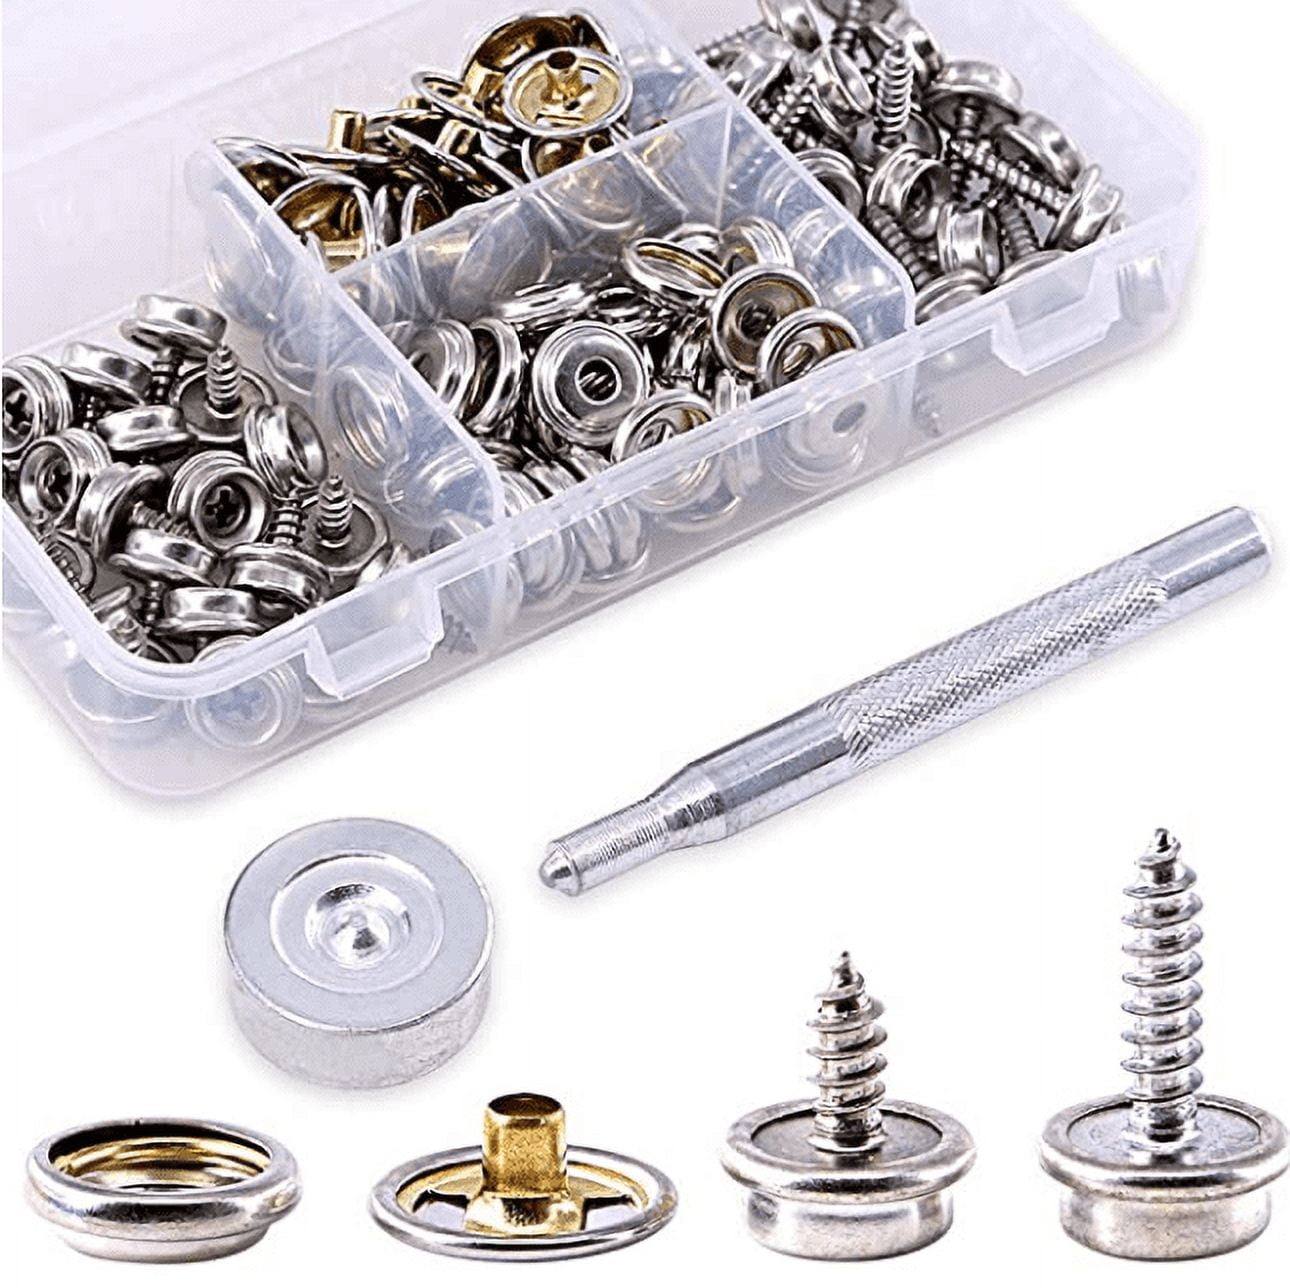  Maerd 152Pcs Canvas Snap Kit with Tool, Stainless Steel Screw  Boat Canvas Snaps Fastener Heavy Duty Metal Marine Button 3/8 Socket with  Setting Tool for Boat Cover Furniture : Arts, Crafts